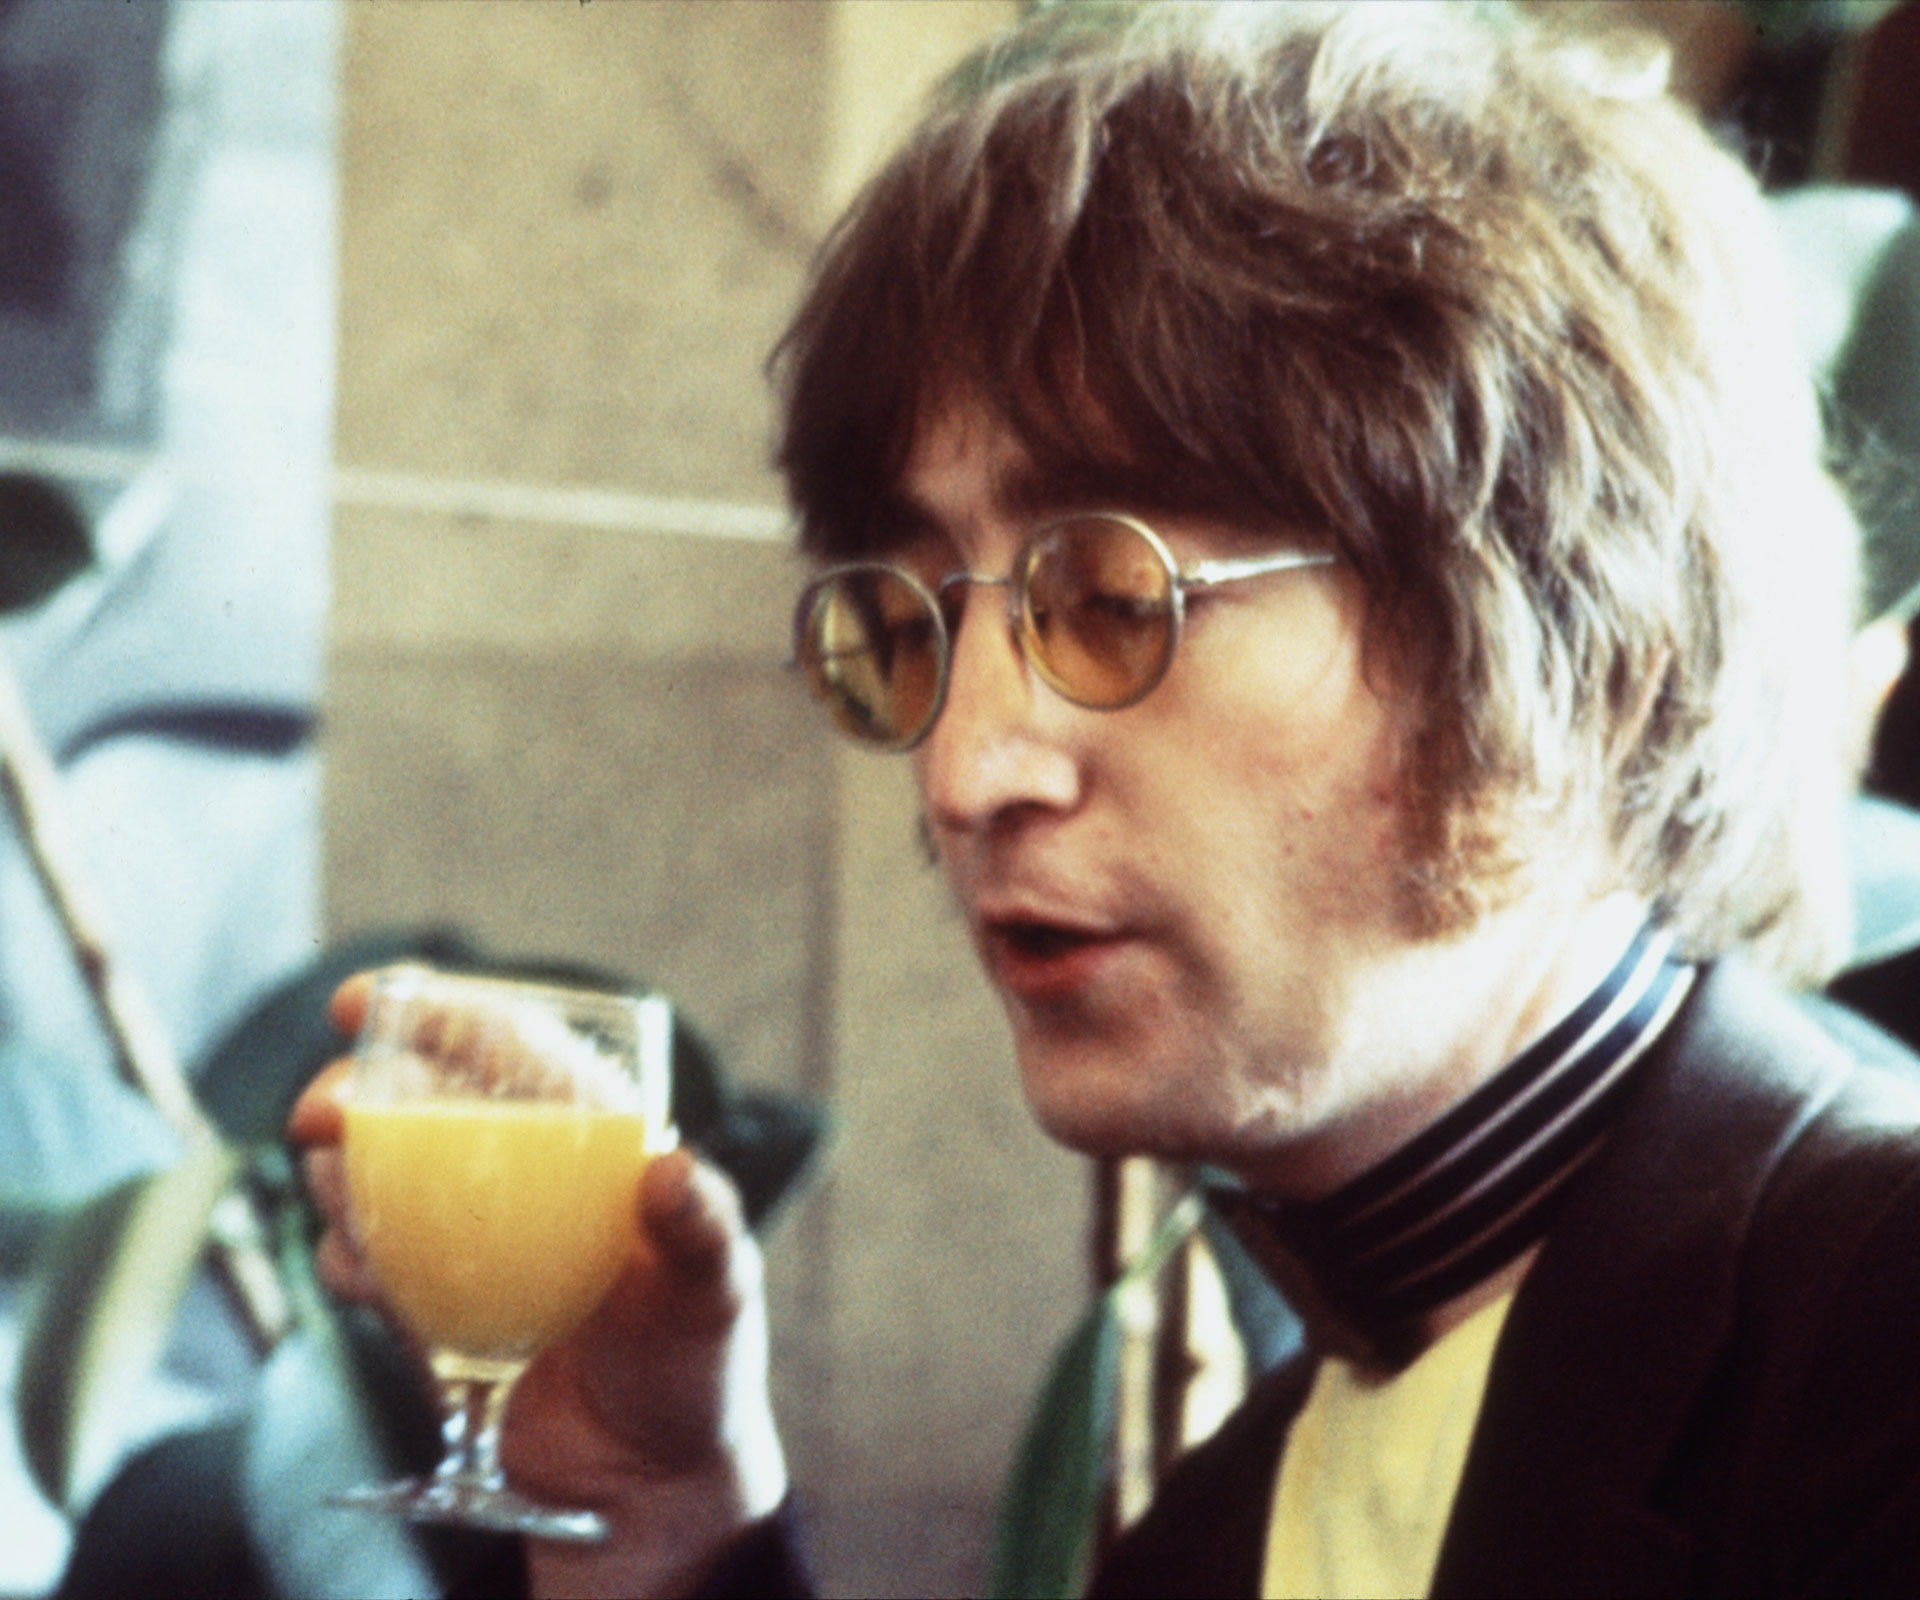 John Lennon protest letter to the Queen found in record sleeve